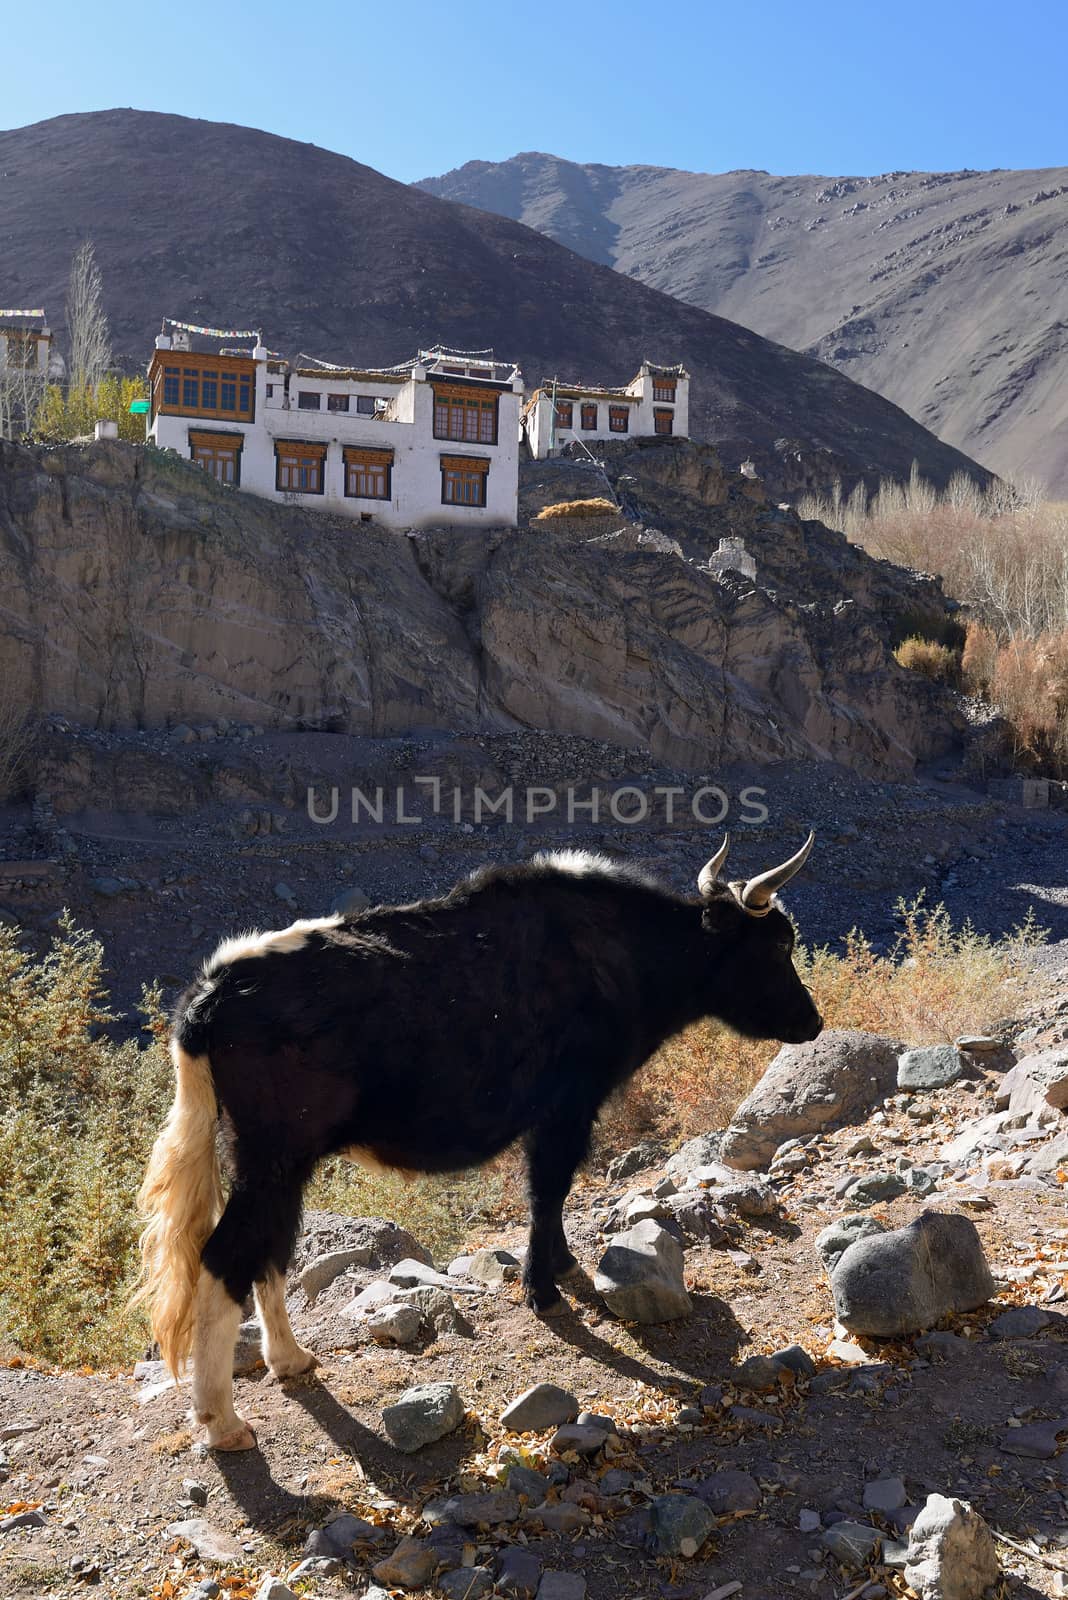 Yak in the valley of Ladakh, India by think4photop